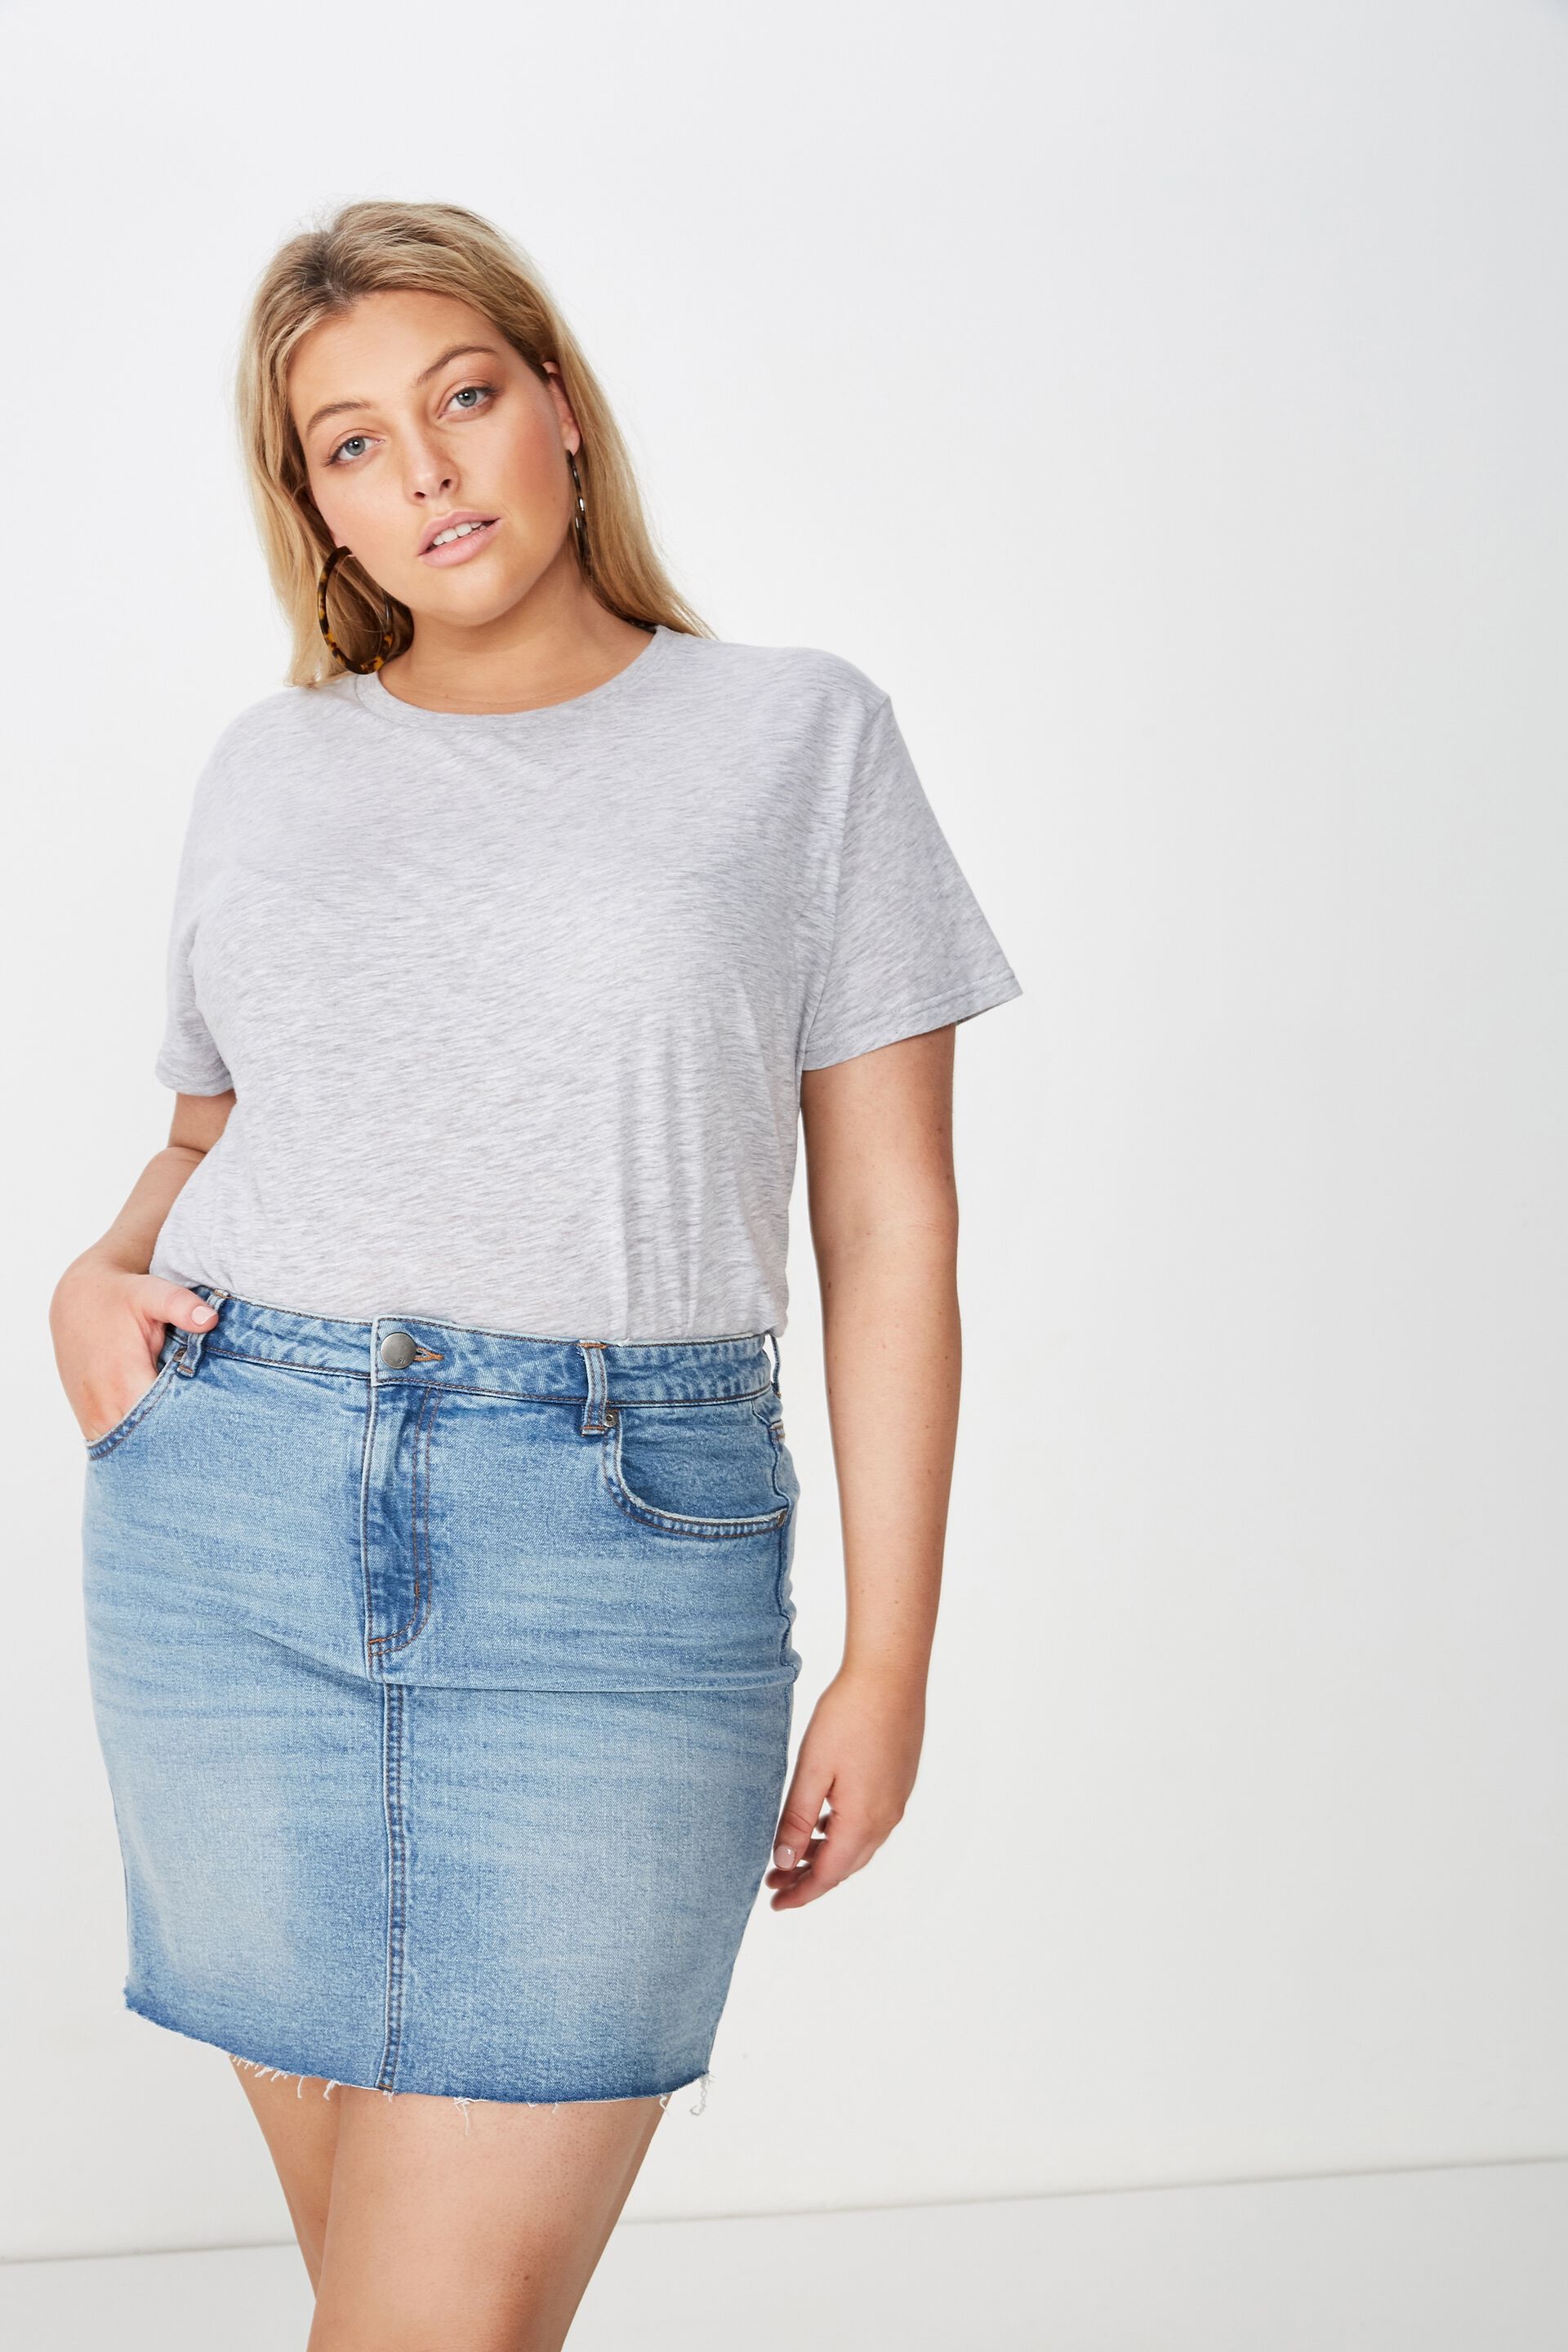 old navy plus size skinny jeans